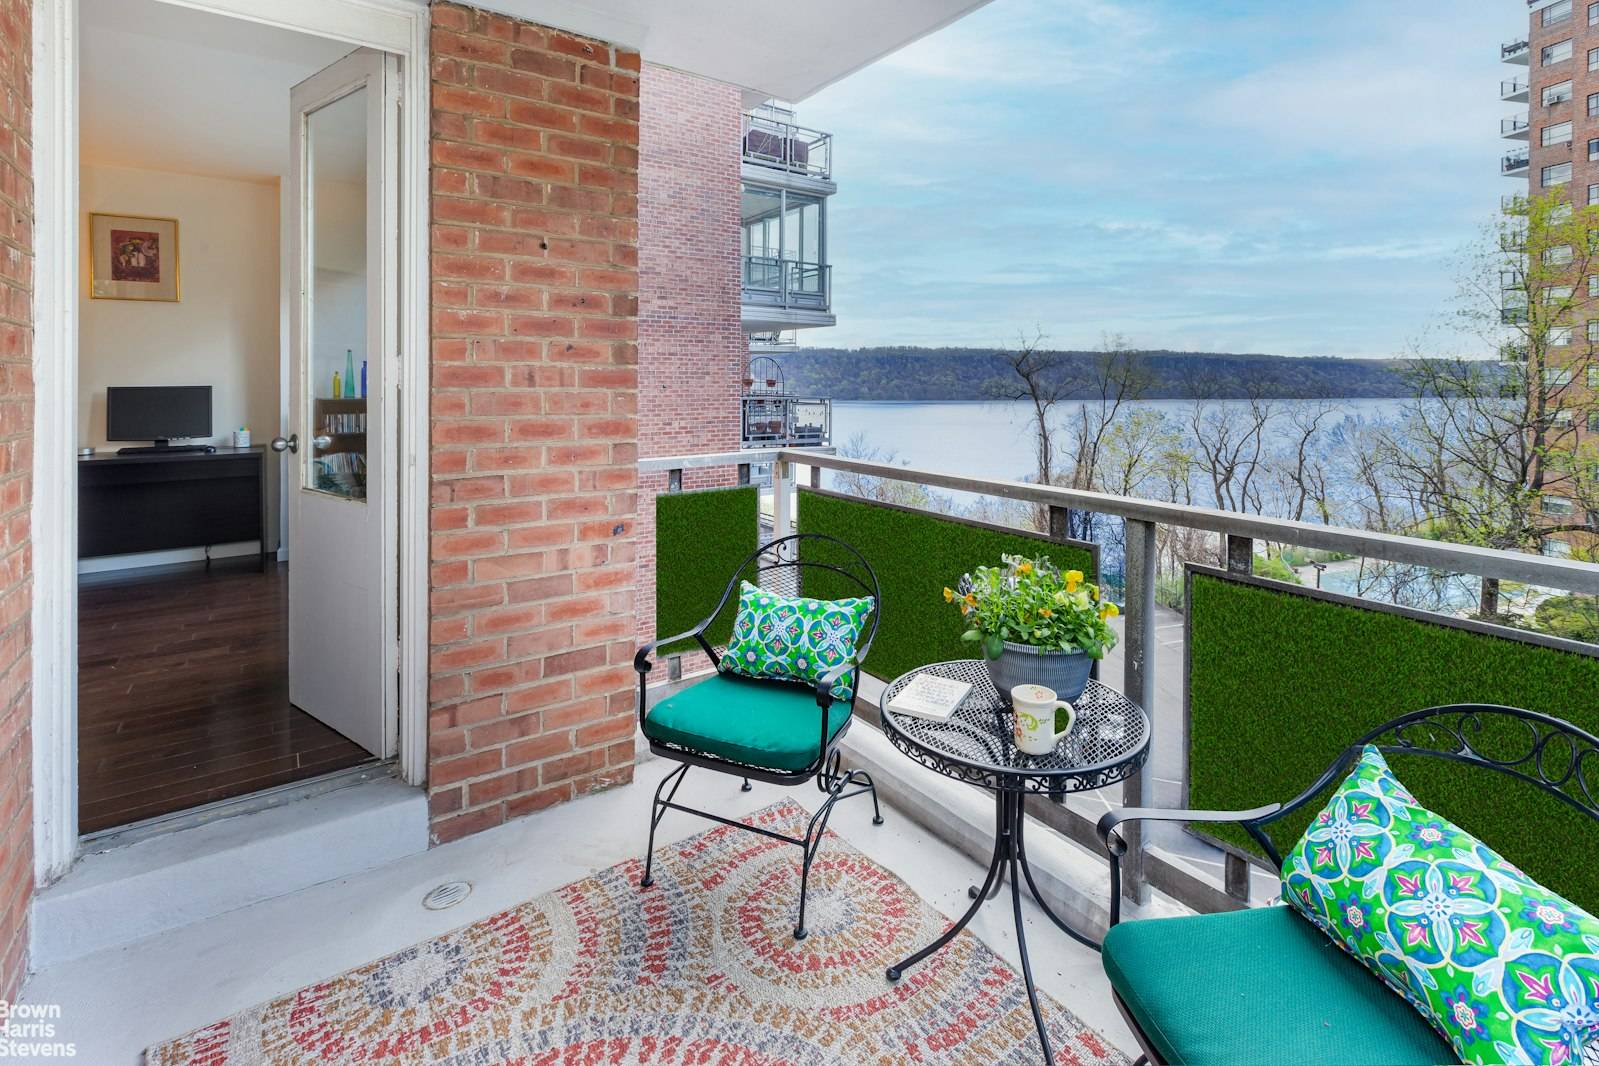 A rarely available corner apartment in one of Riverdale's most sought after riverfront luxury co ops.